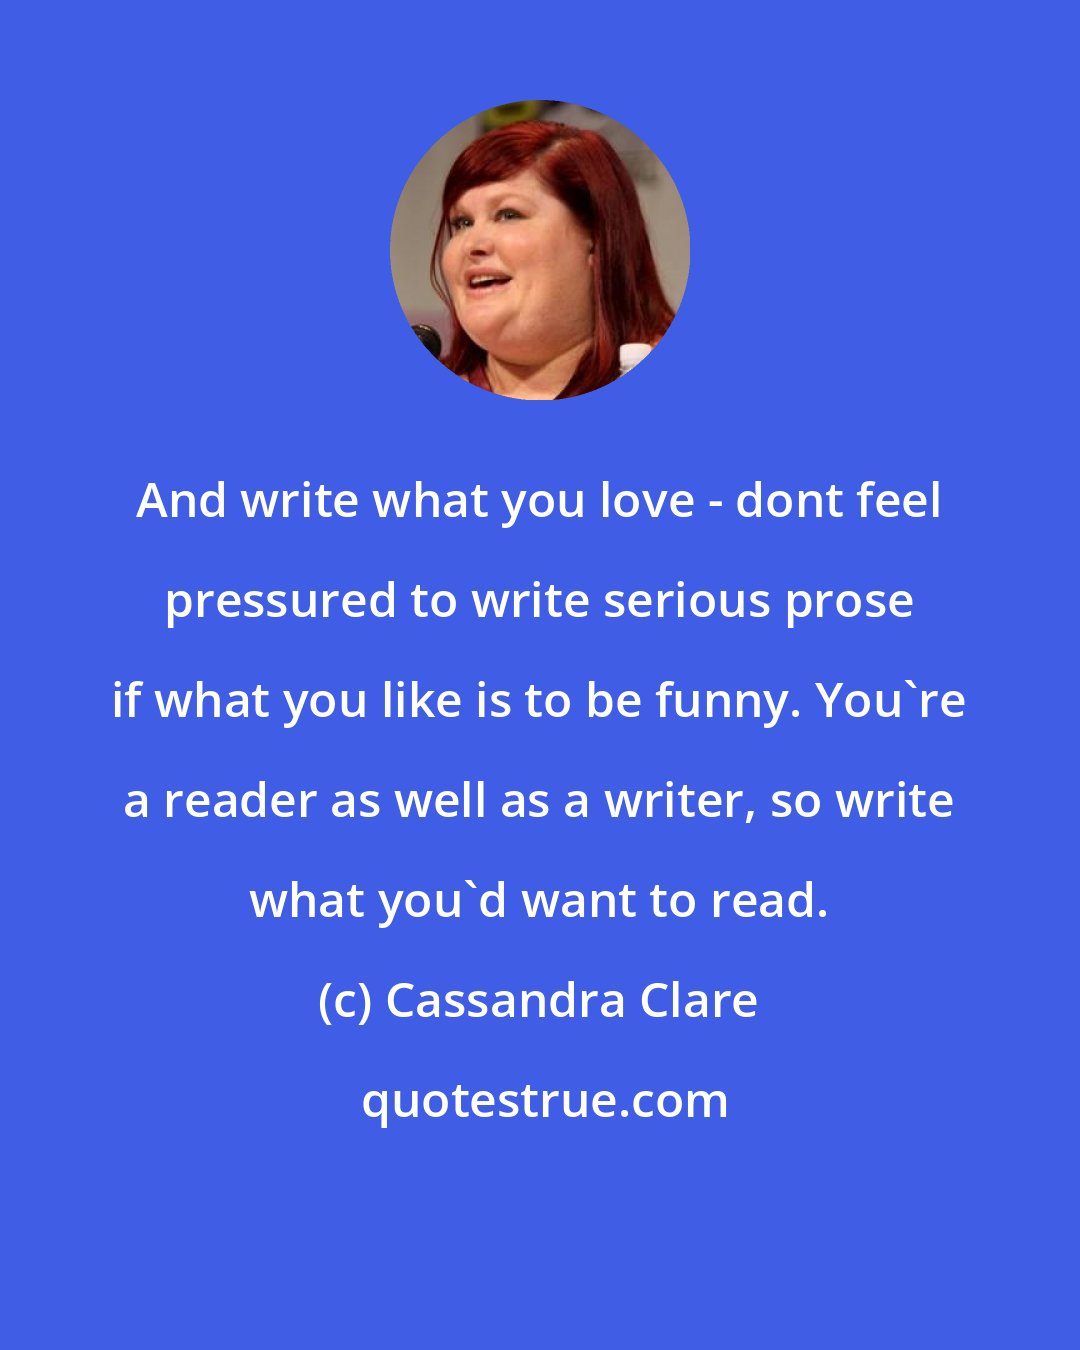 Cassandra Clare: And write what you love - dont feel pressured to write serious prose if what you like is to be funny. You're a reader as well as a writer, so write what you'd want to read.